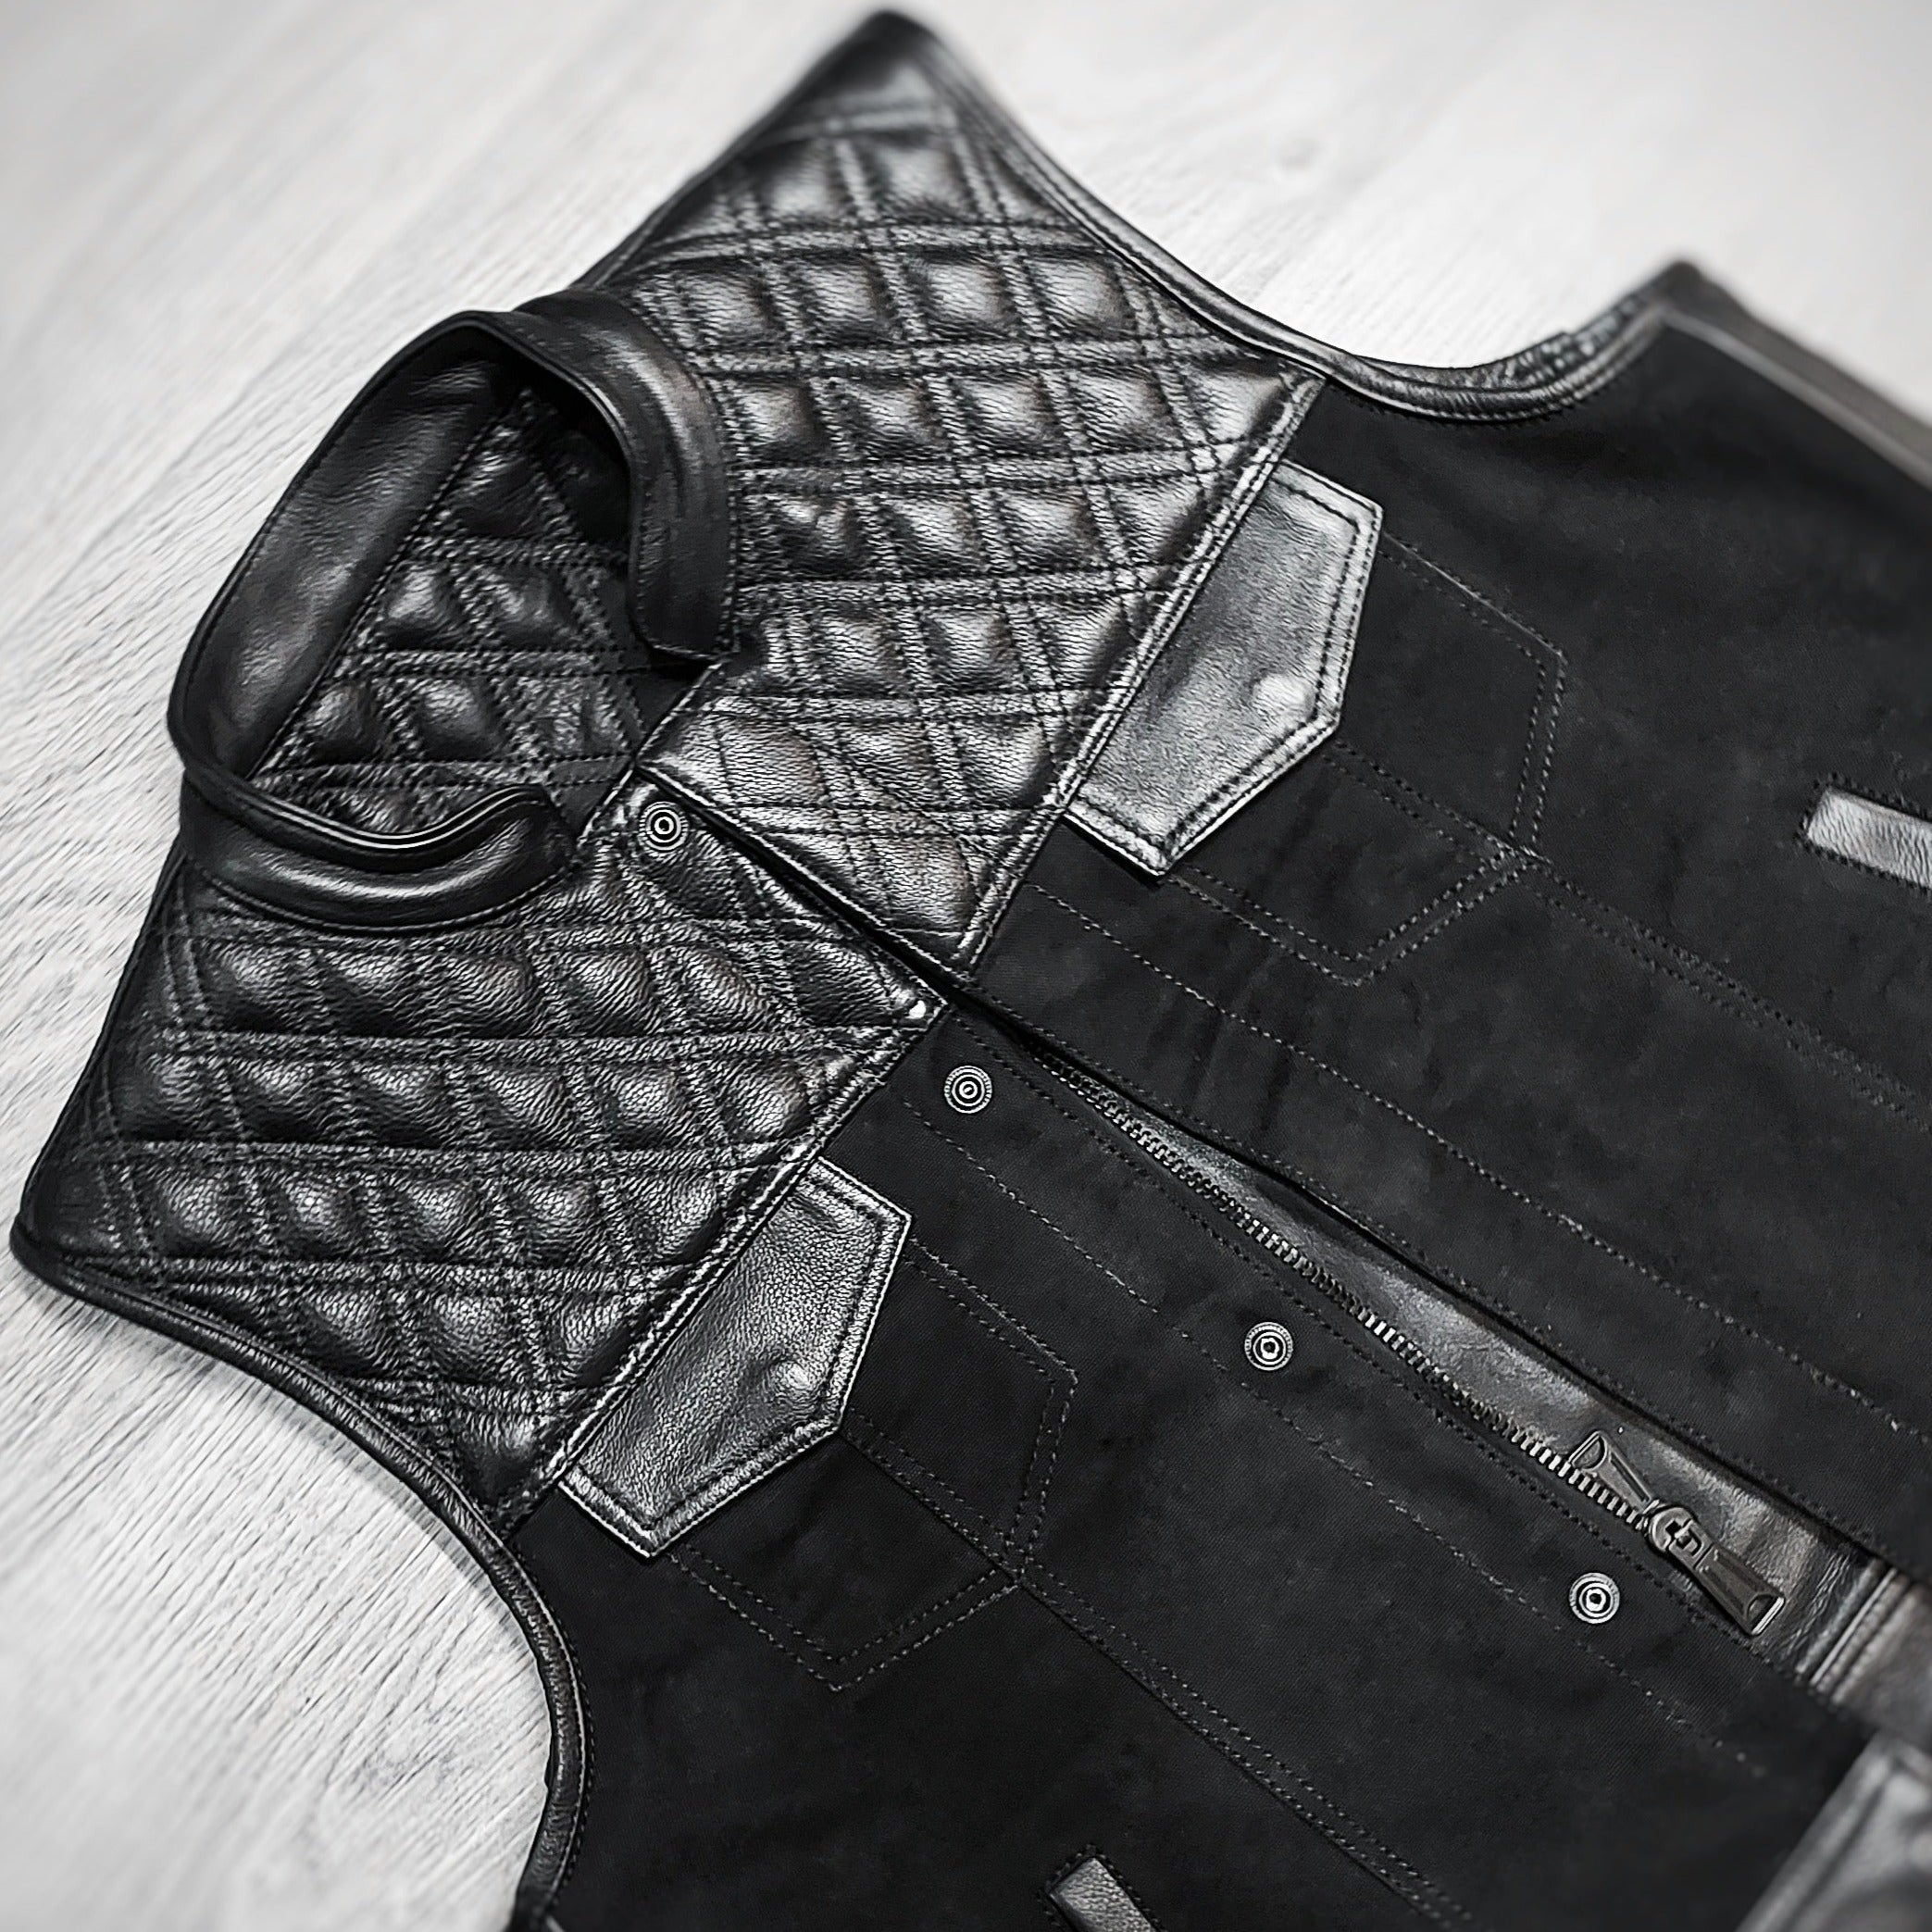 REVERSIBLE US "OFF THE RACK" STEALTH-FIFTY VEST